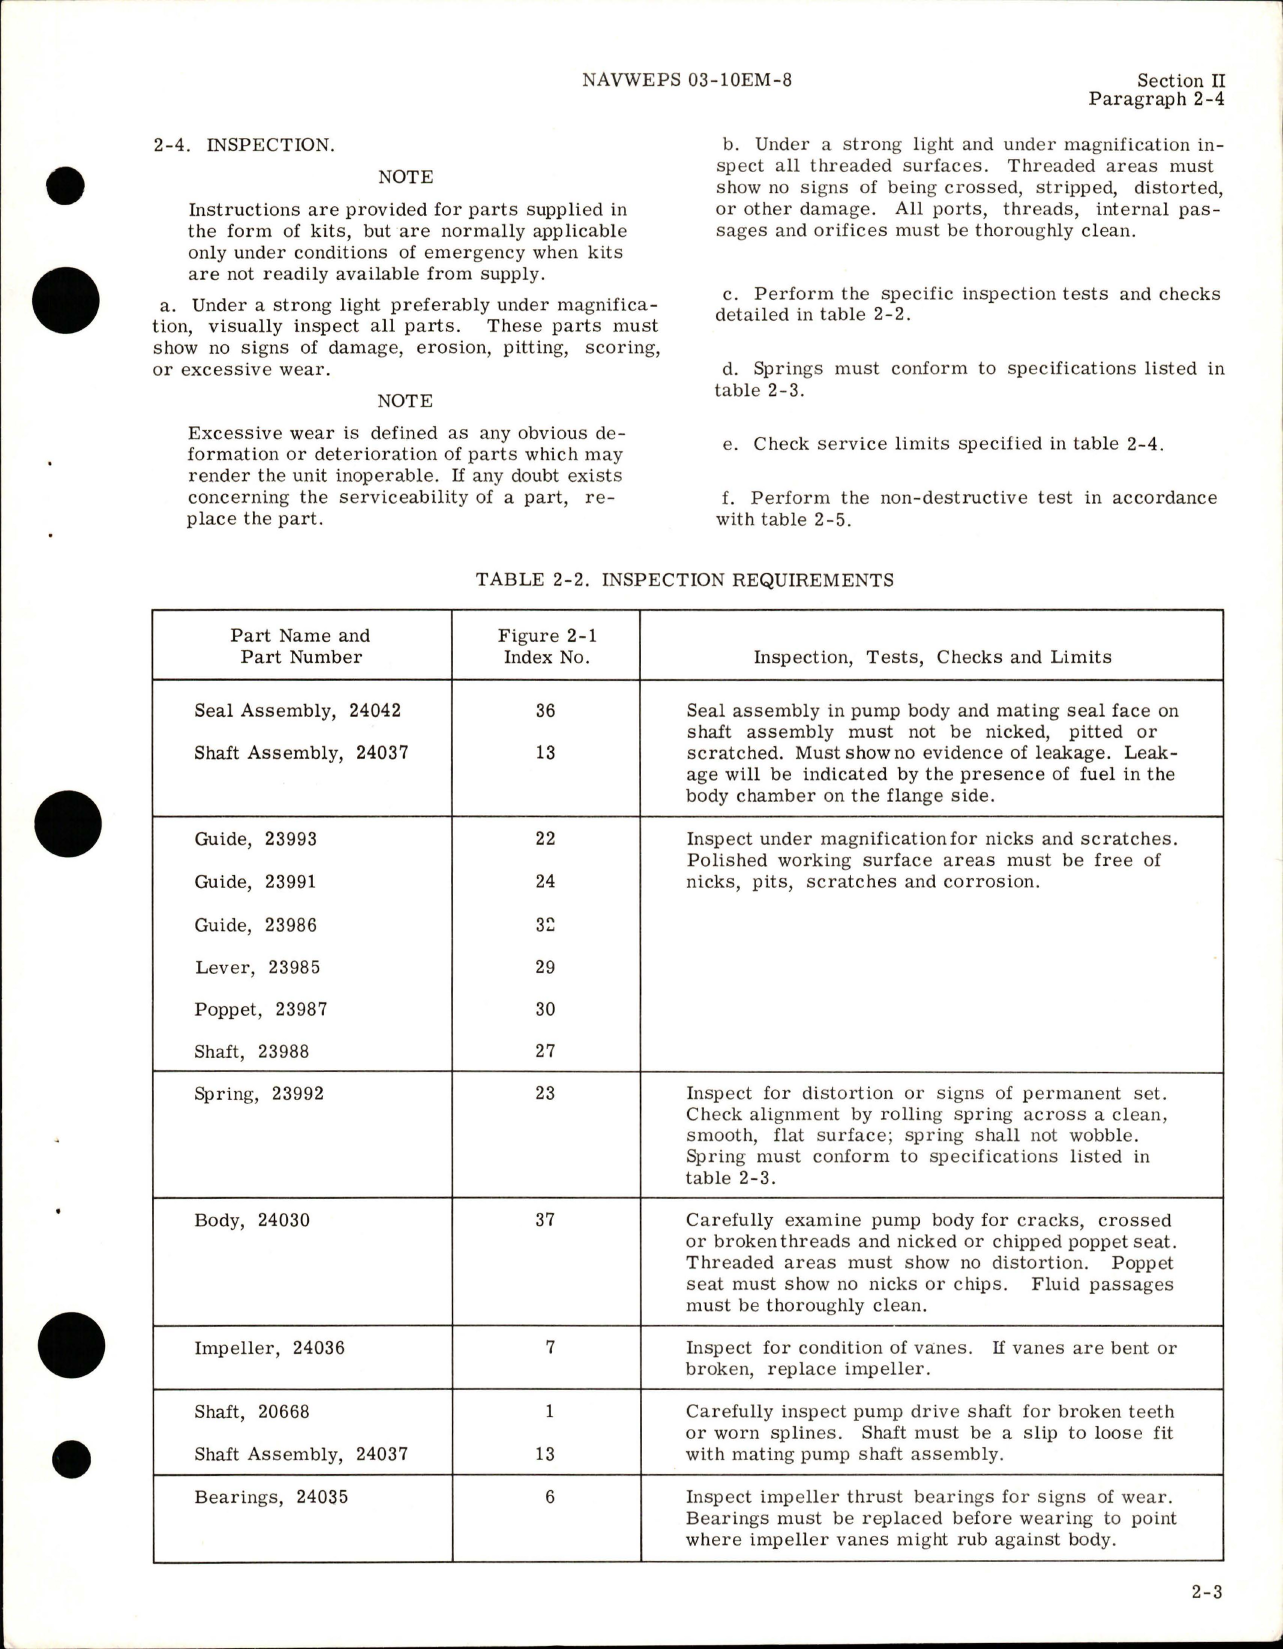 Sample page 7 from AirCorps Library document: Overhaul Instructions for Fuel Boost Pump (Engine Driven) - Part 23900 and 50138 